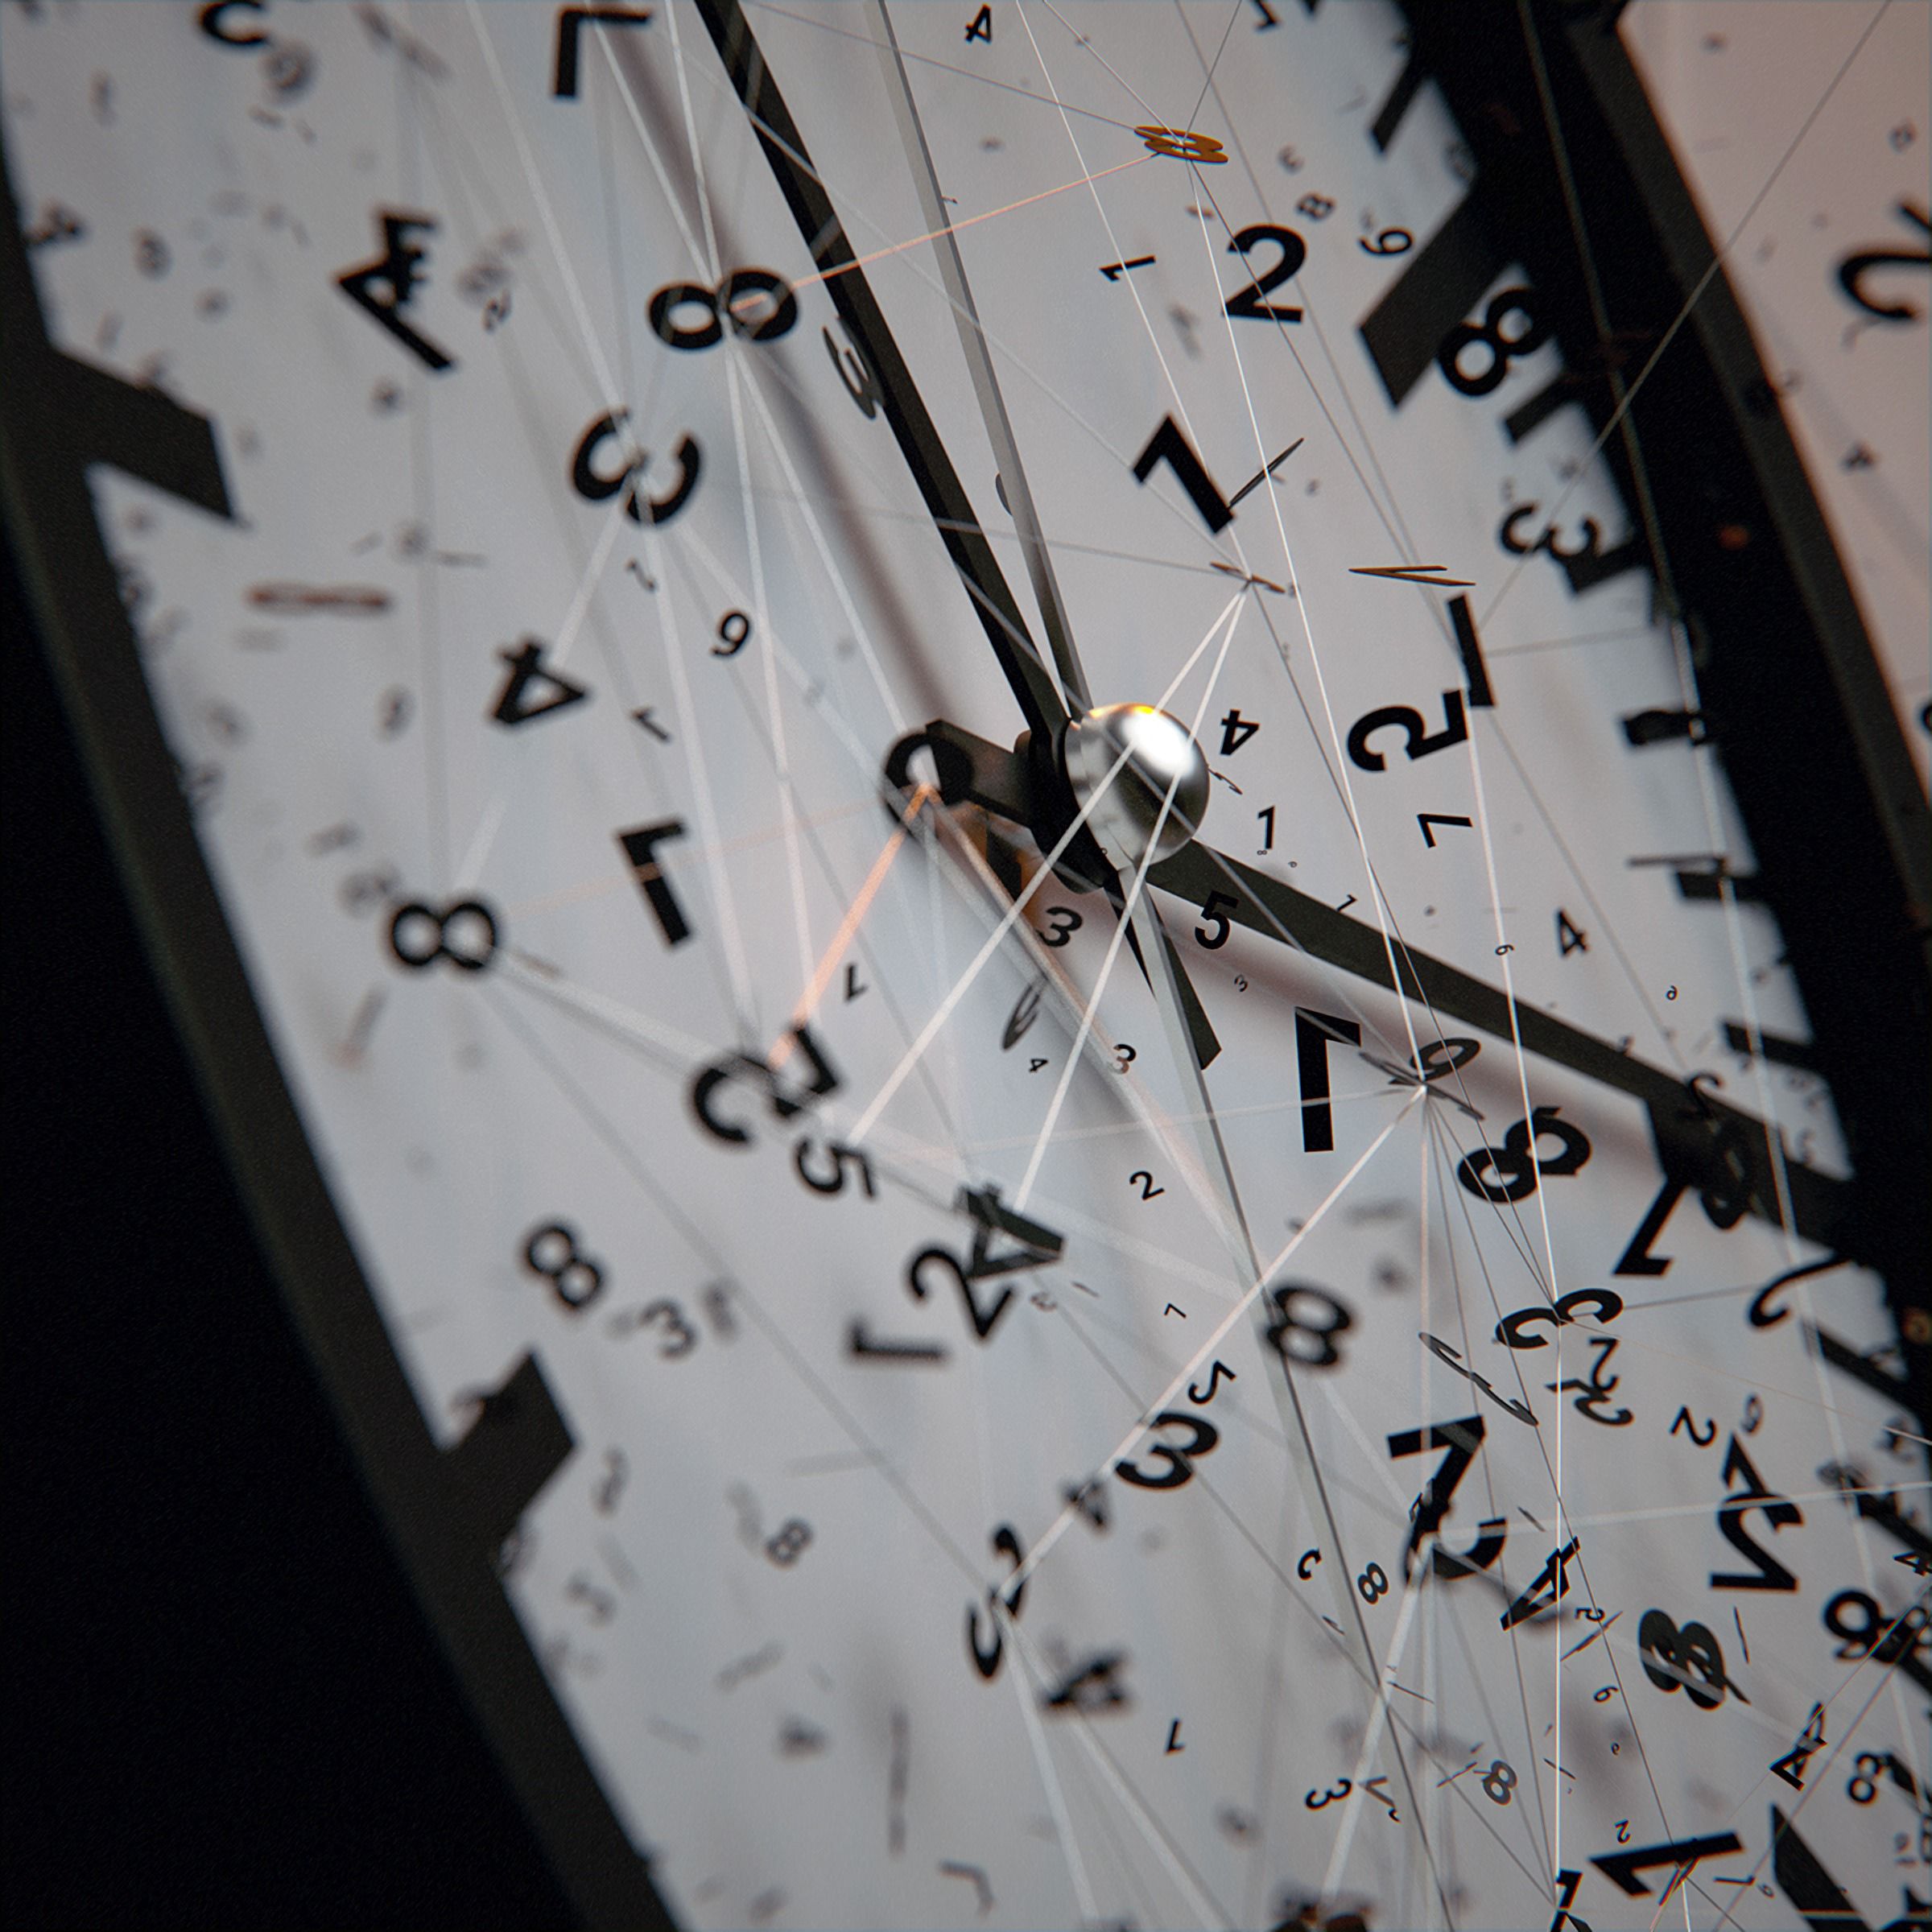 miscellanea, clock, numbers, dial, intricate, miscellaneous, clock face, lines, confused, arrows